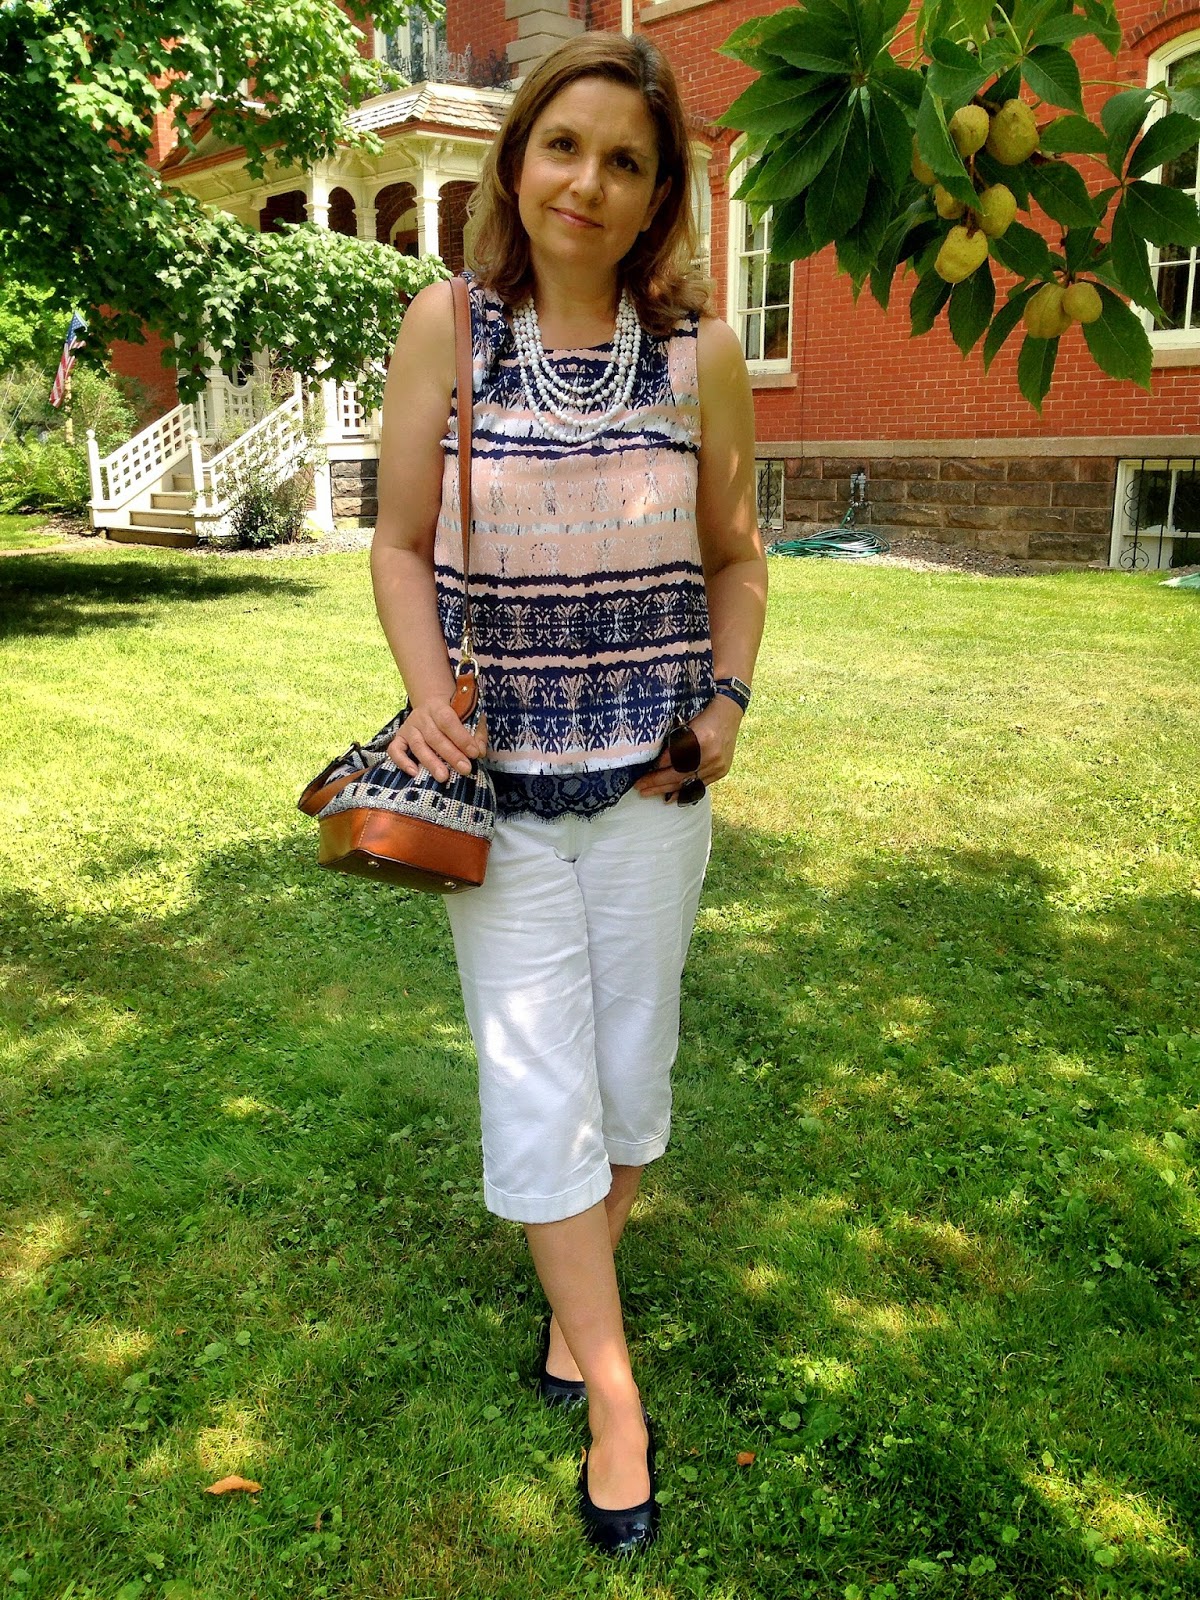 Amy's Creative Pursuits: Fashion Over Fifty: Choosing Summer Clothes Wisely